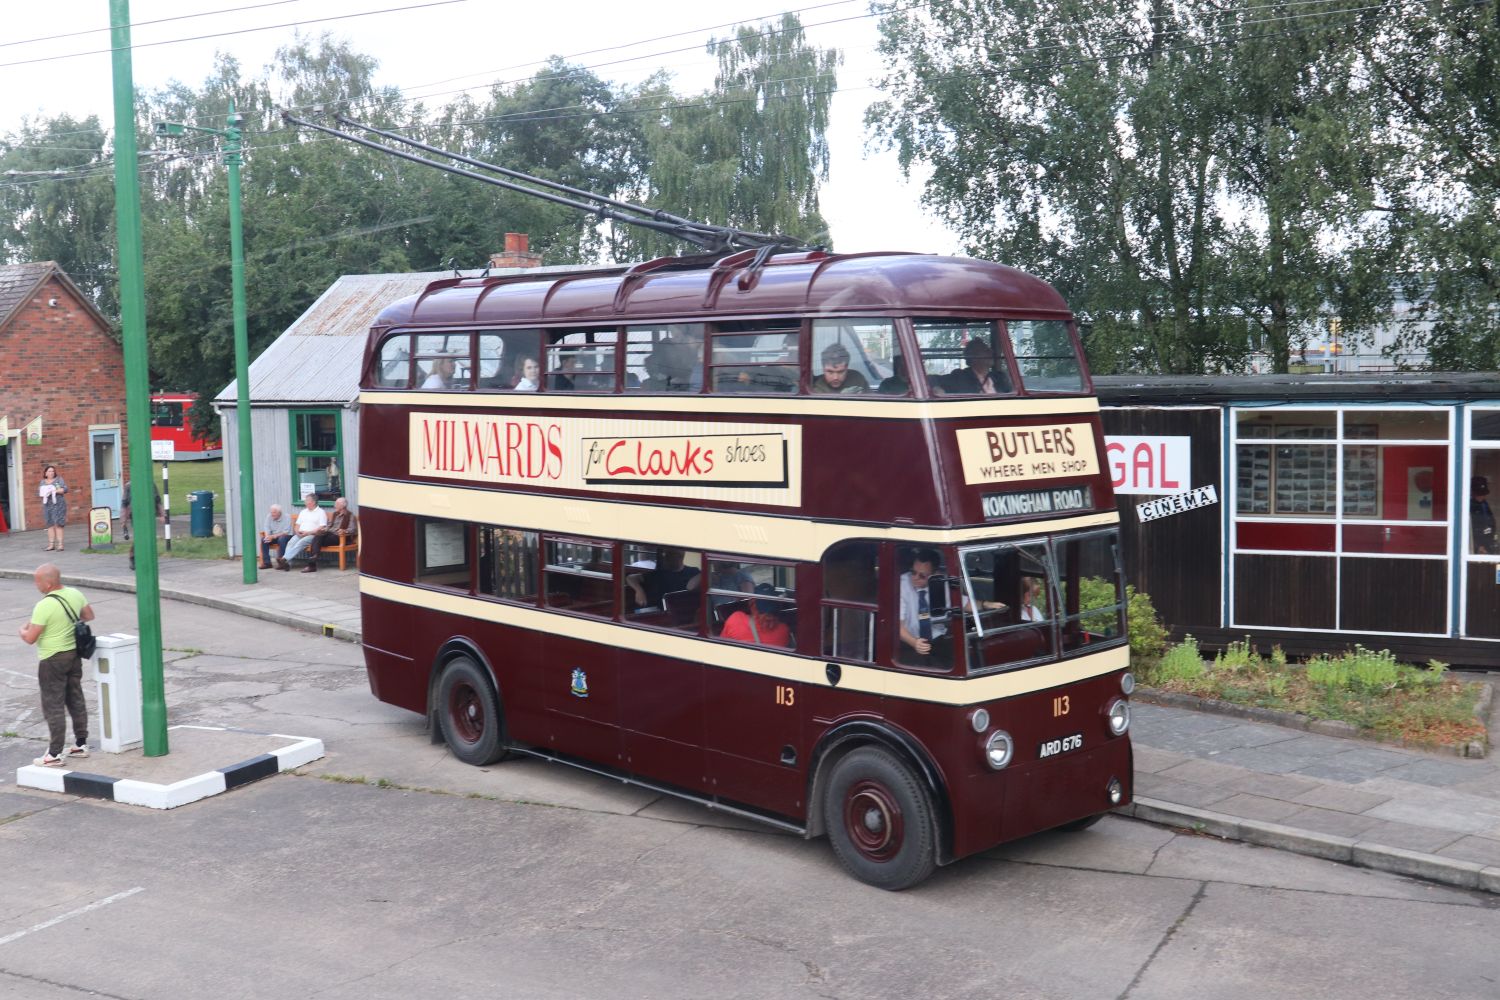 Originally purchased to replace trams, this Park Royal highbridge bodied AEC661T is said to have been the first trolleybus to be privately preserved and a significant vehicle in the history of trolleybus preservation. It served with Reading from 1939 to 1961